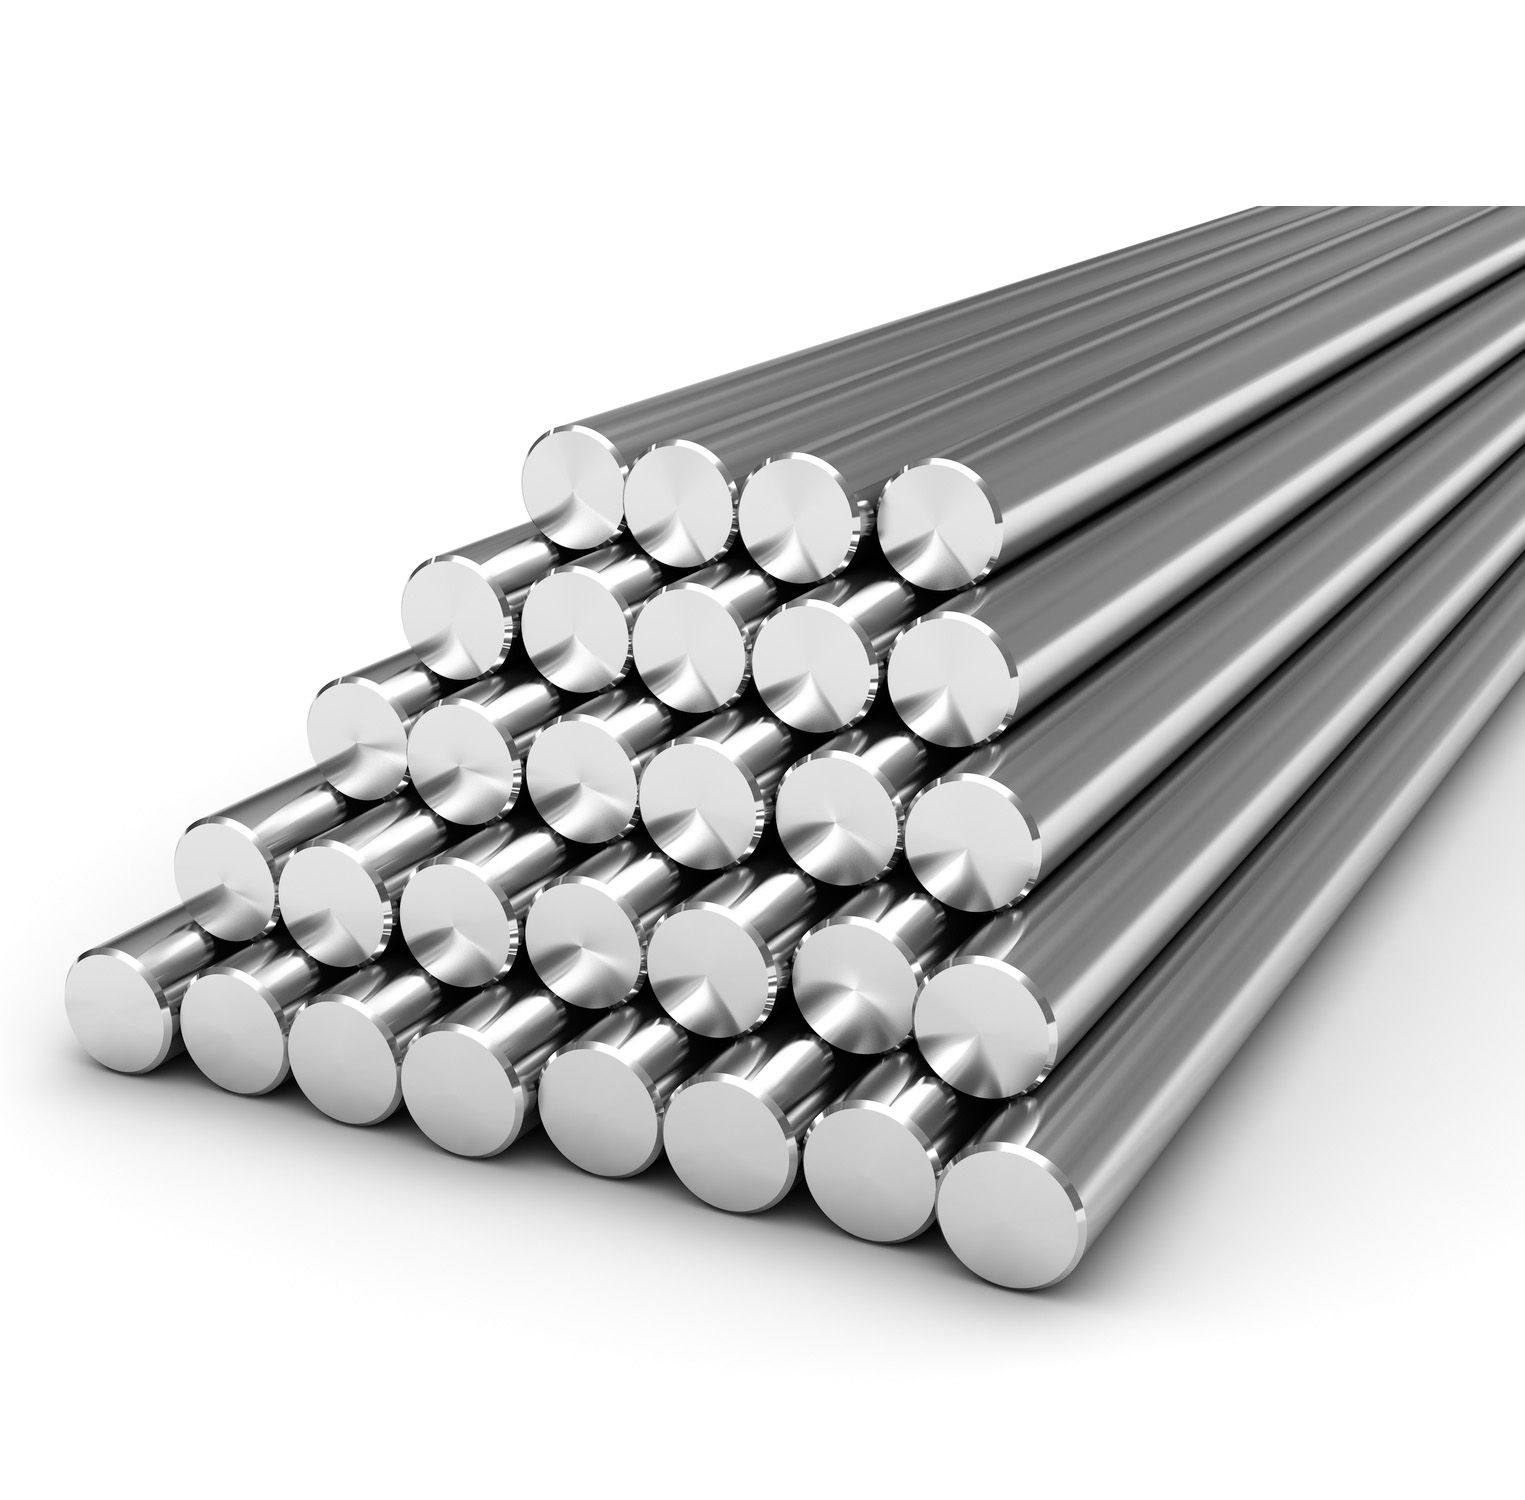 Stainless Steel Round Solid Bar Rod 2mm to 50mm Diameter 100mm to 1000mm Long